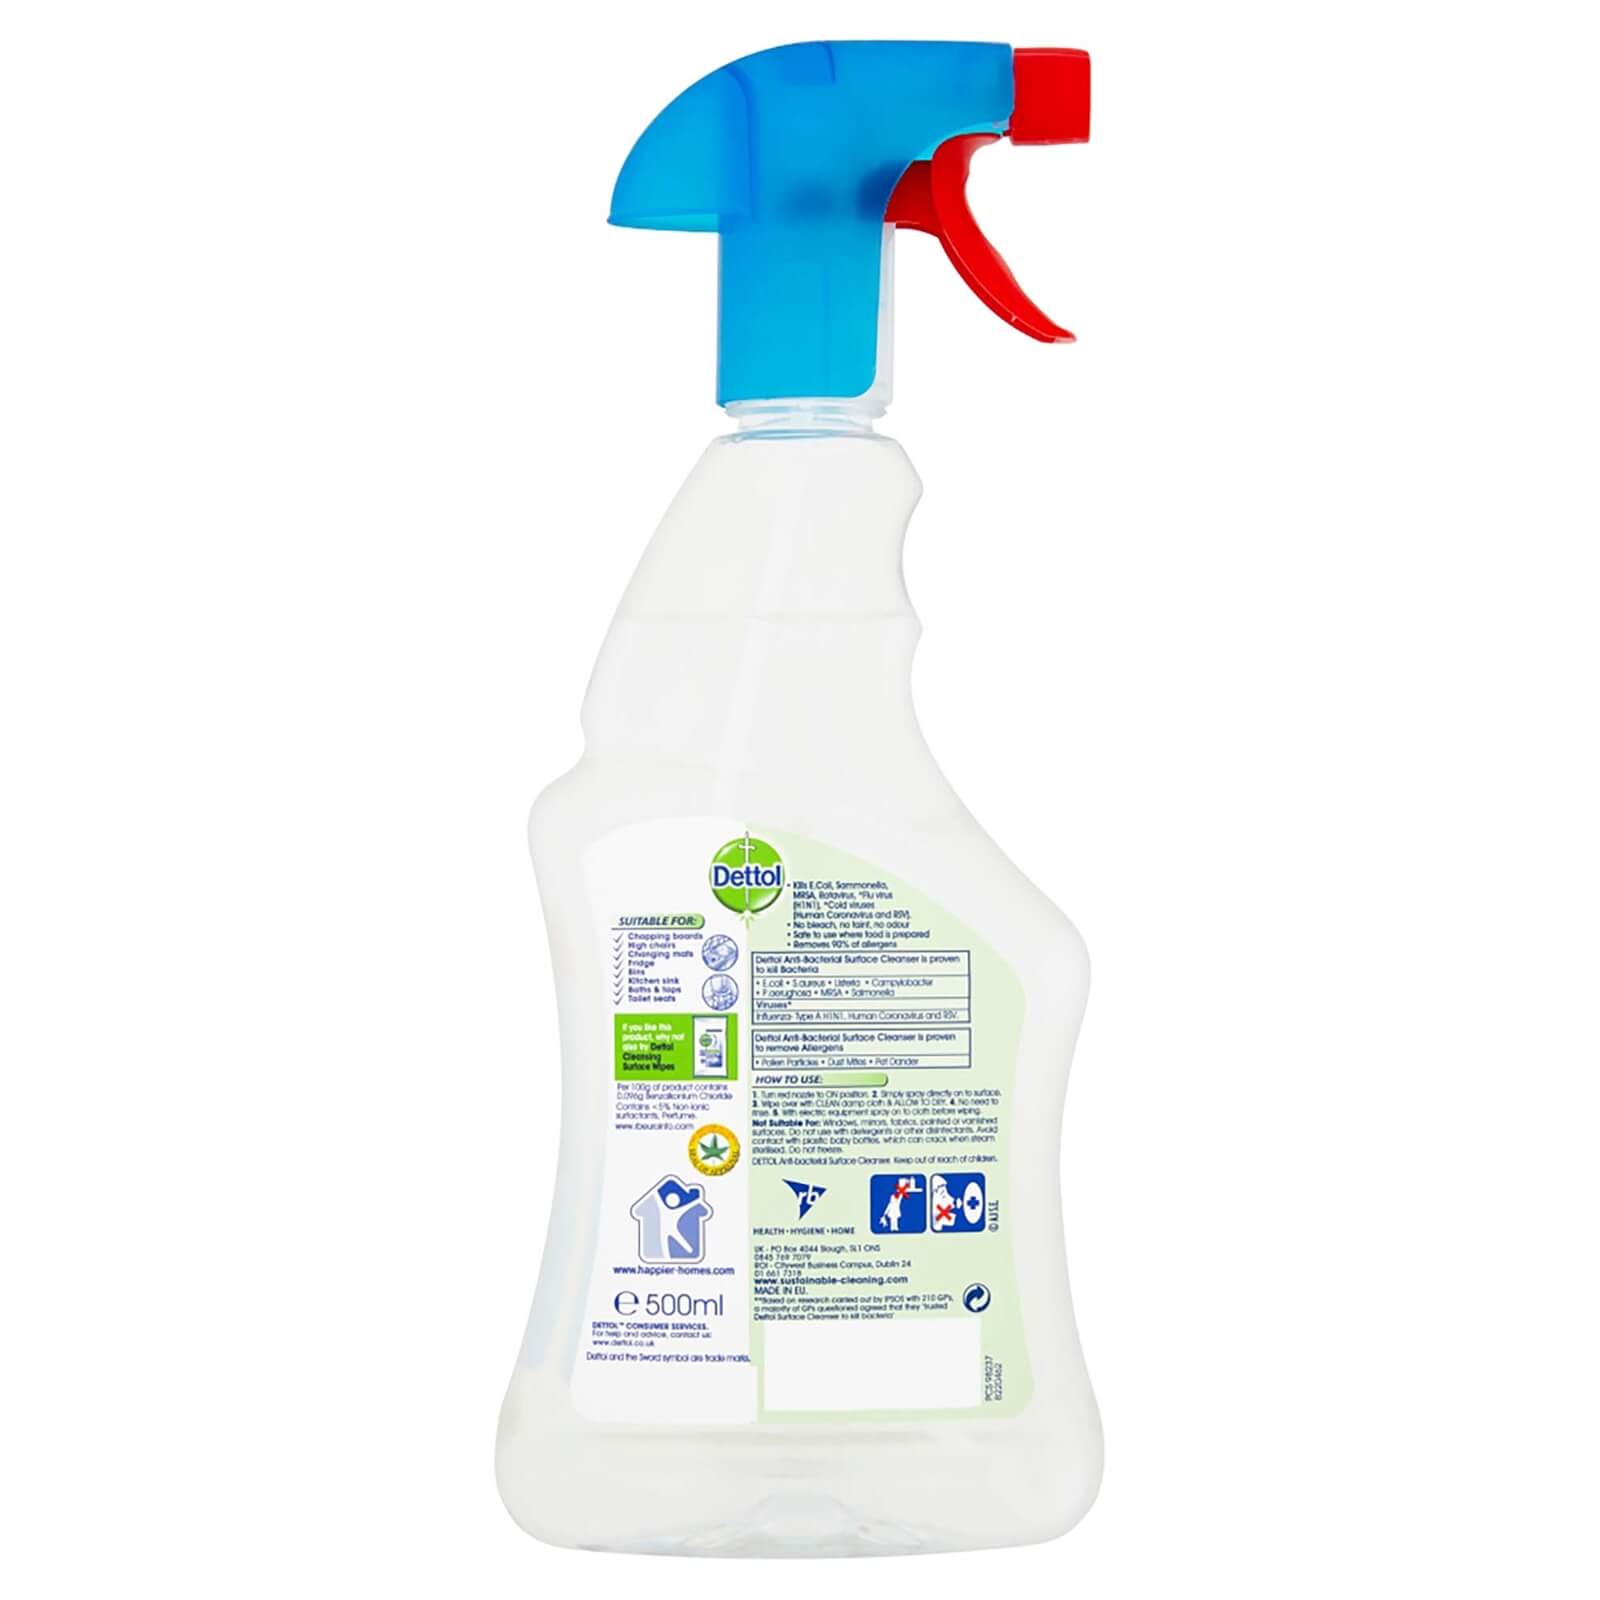 Dettol Surface Cleaner - 500ml